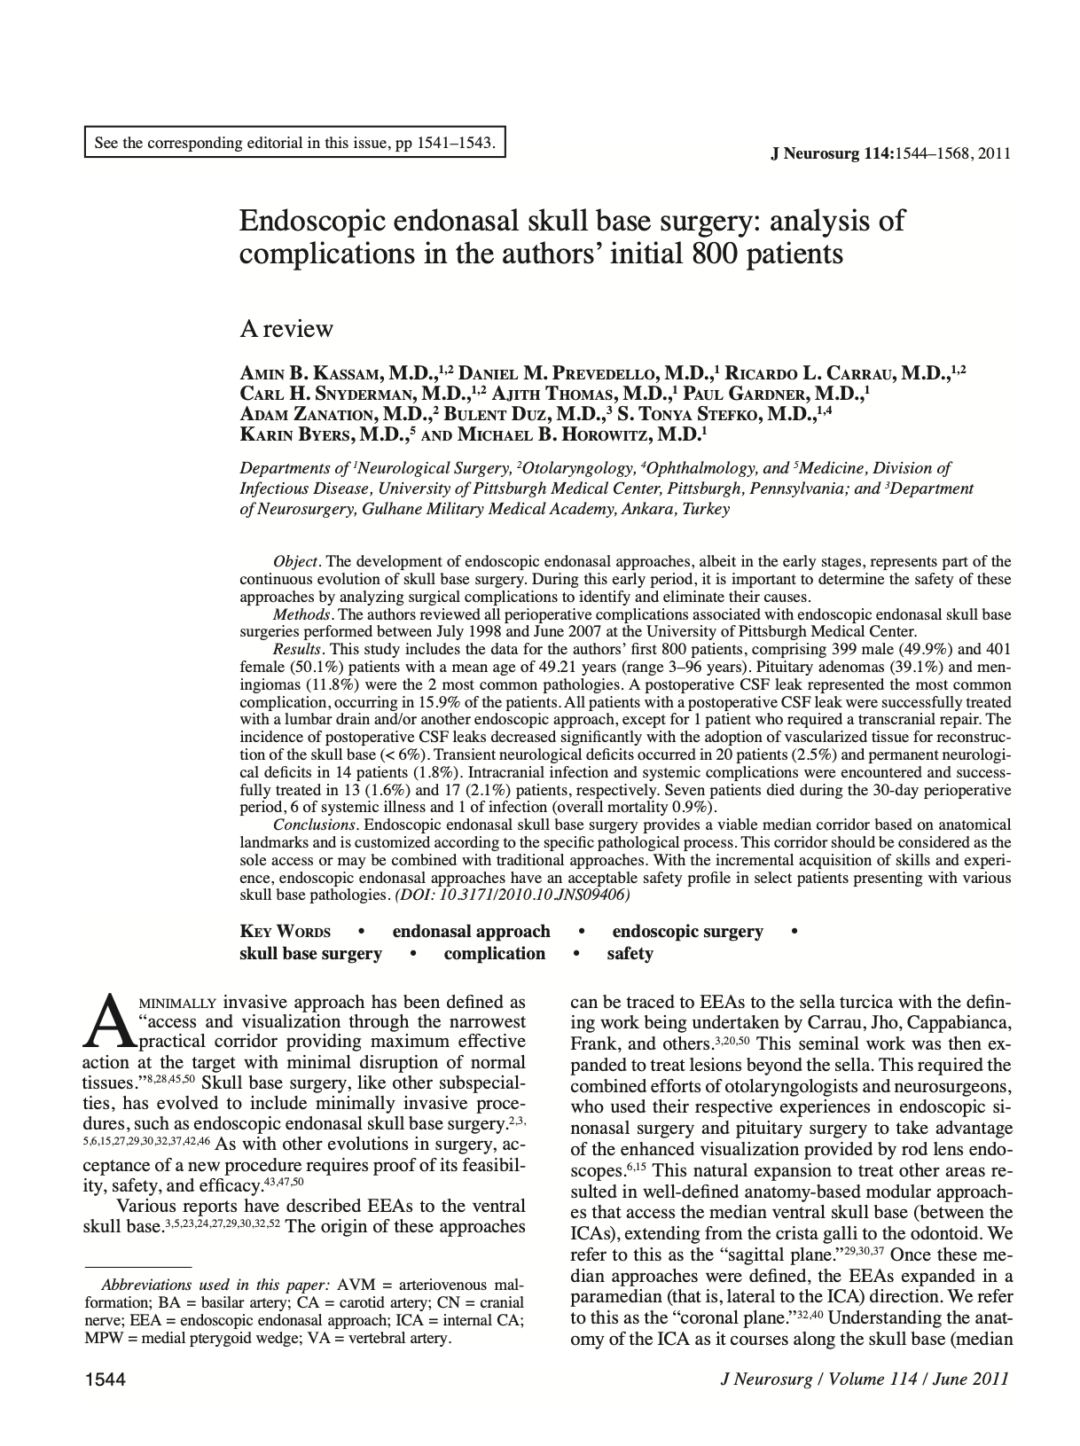 Endoscopic endonasal skull base surgery: analysis of complications in the authors’ initial 800 patients